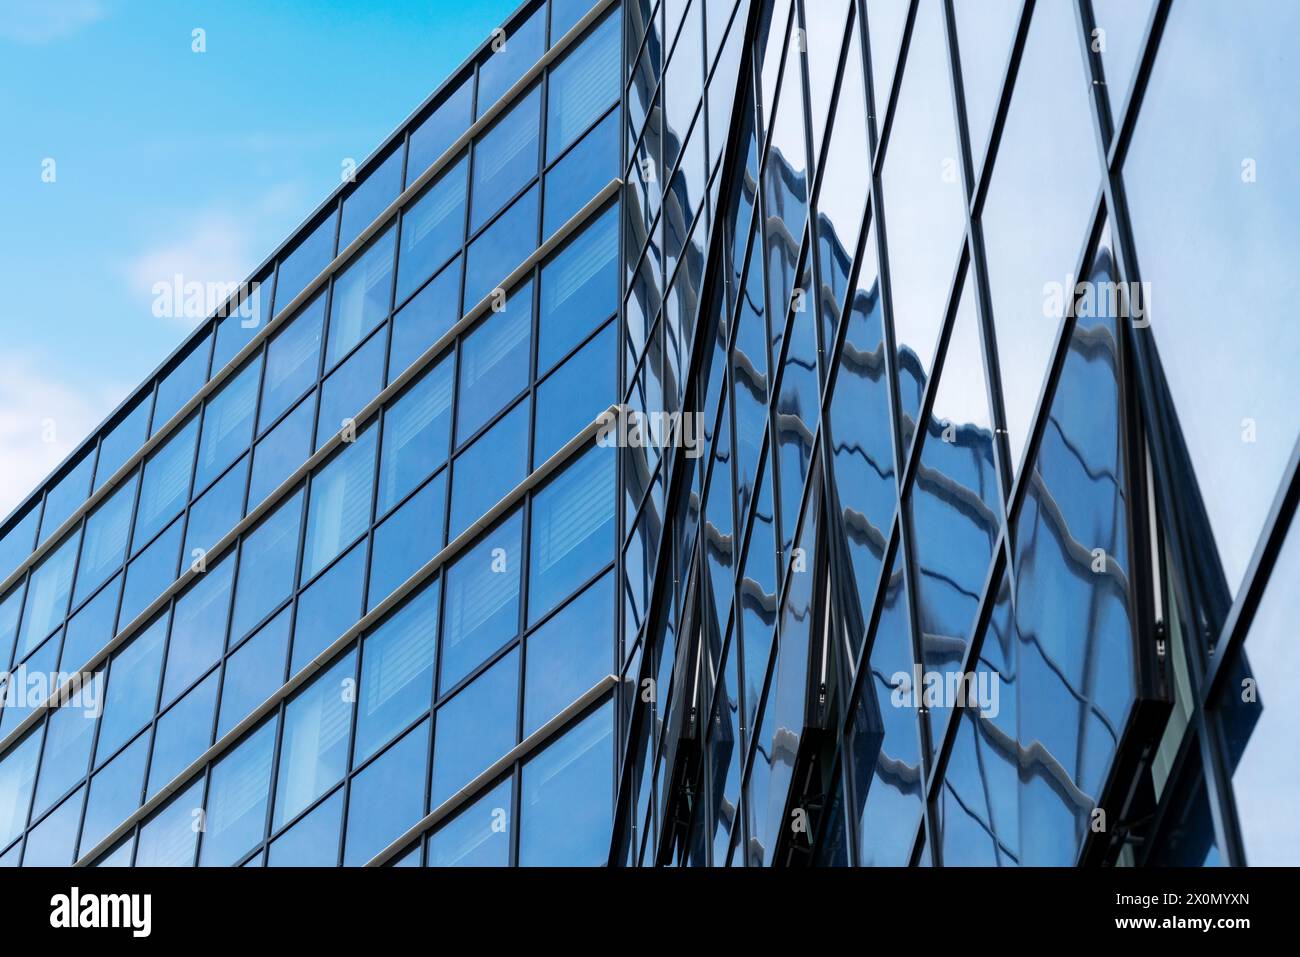 City business architecture style. Part of business building. Stock Photo